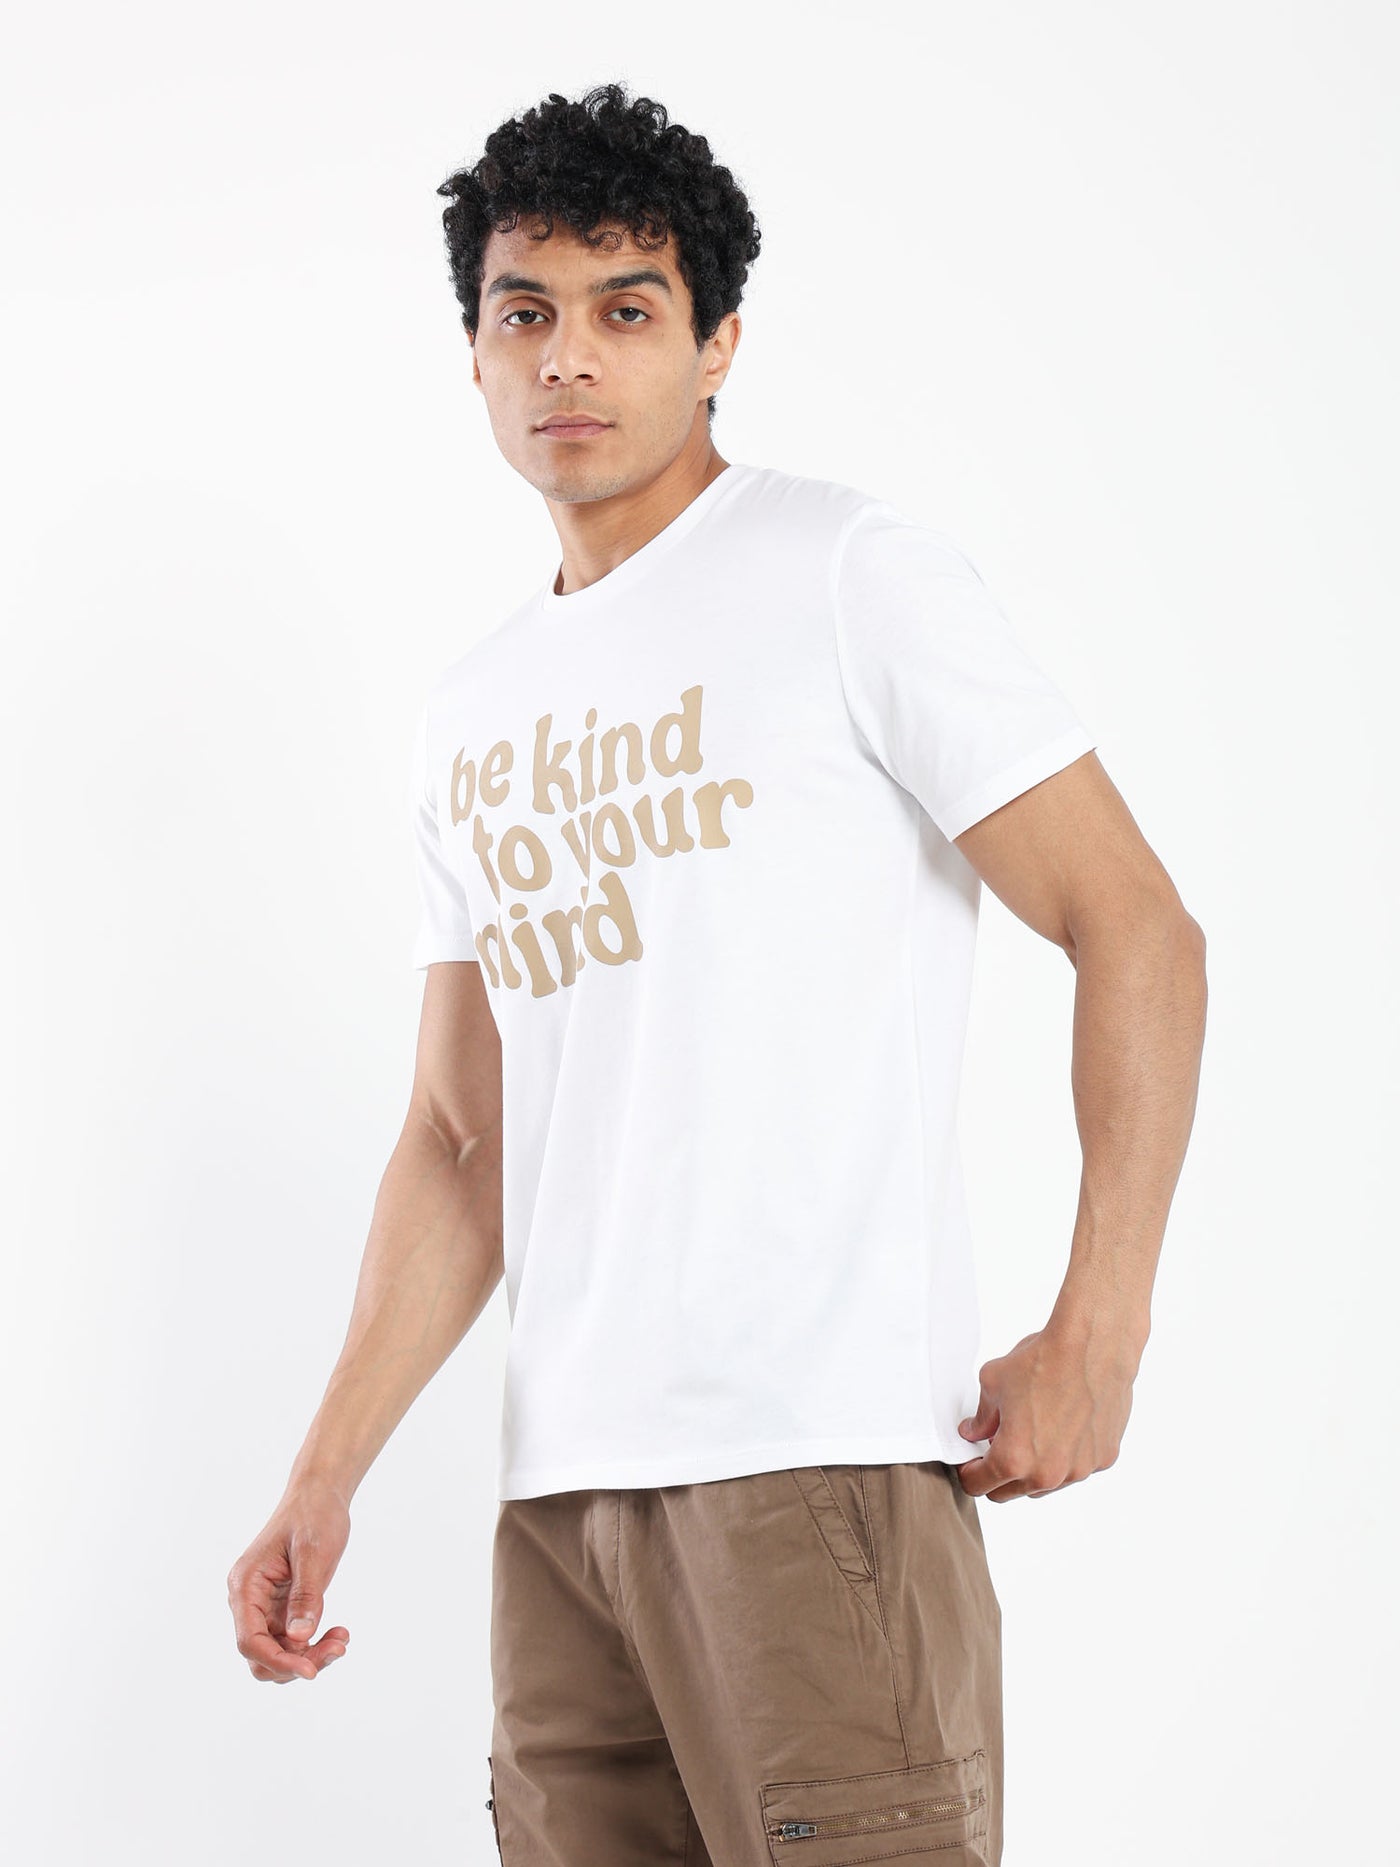 T-Shirt - "Kind To Your Mind" Front Print